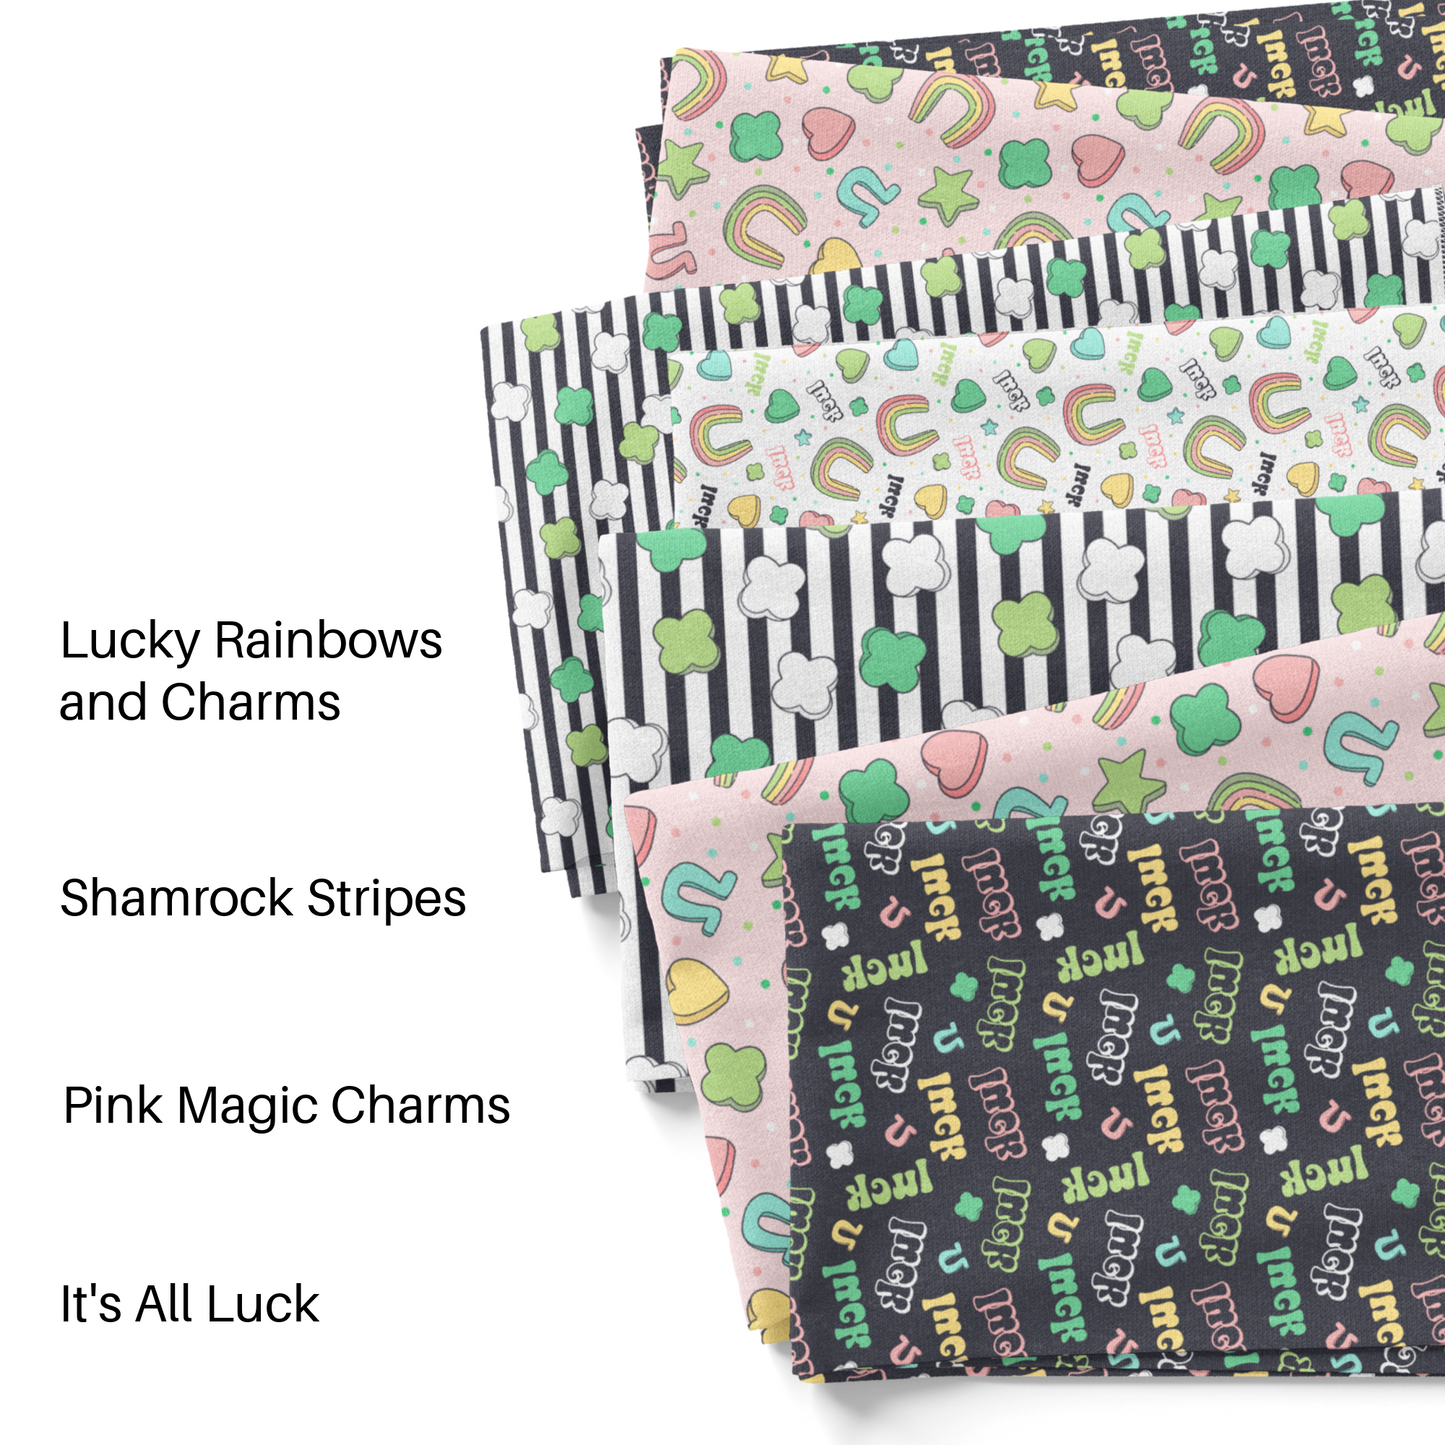 Sweet Shoppe Design St. Patrick's Day fabric by the yard swatches.